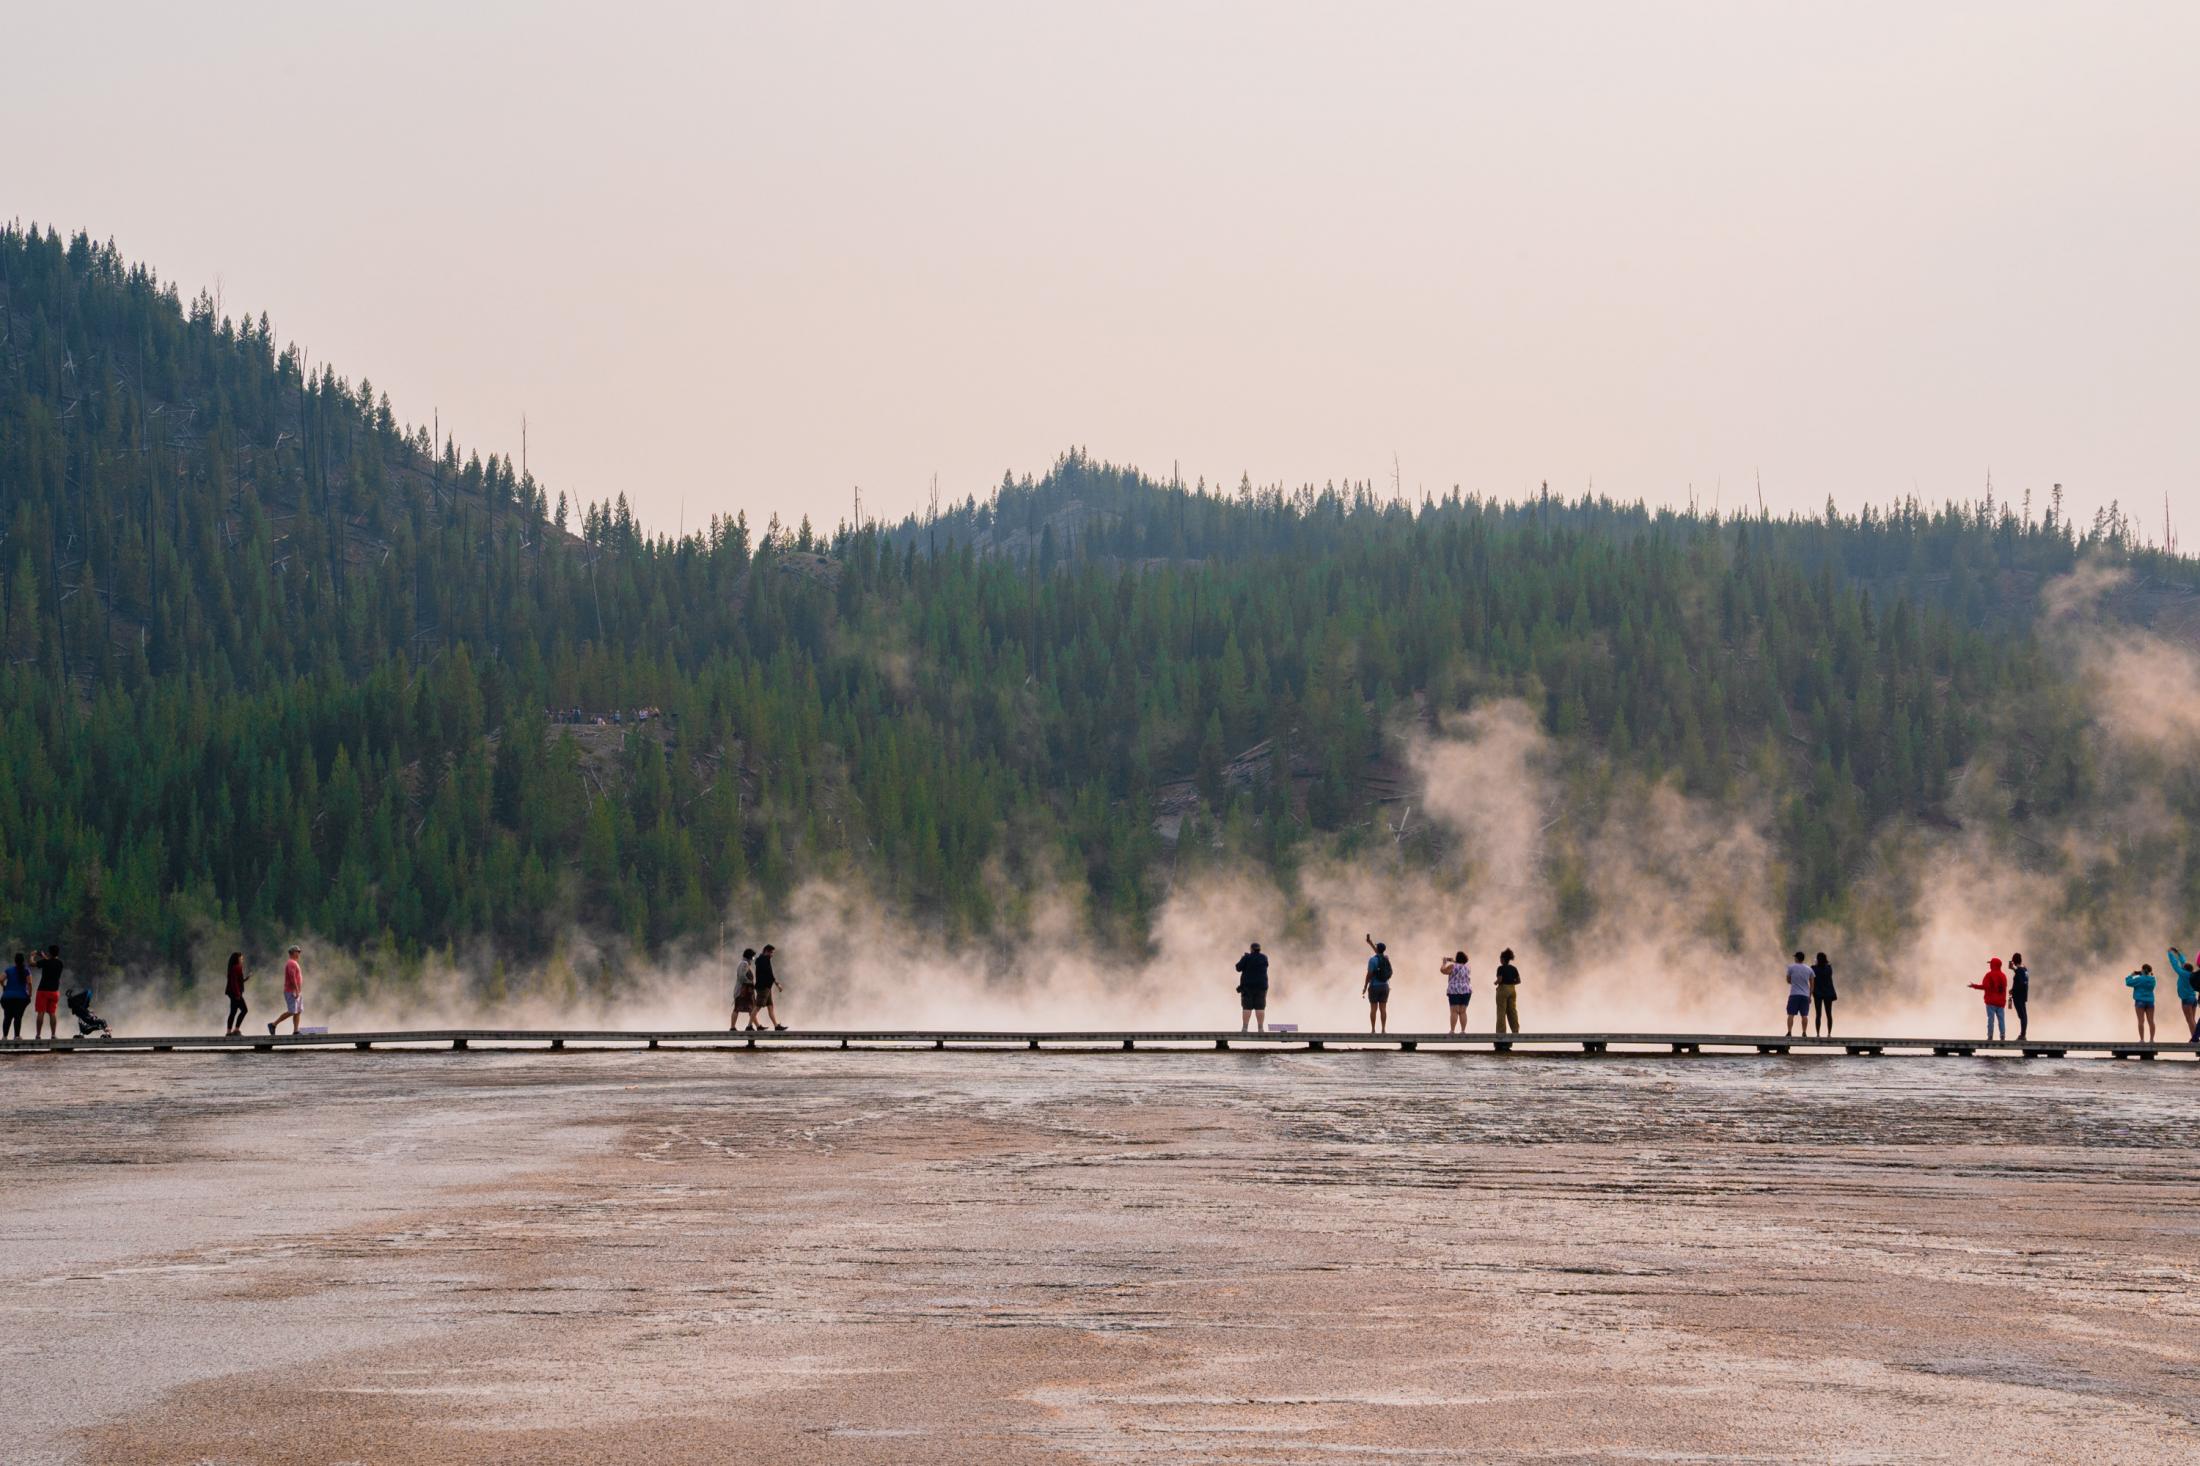 Bison, elk and social distance: A photographer’s view from Yellowstone during delta - The board trails of the Grand Prismatic Spring through...